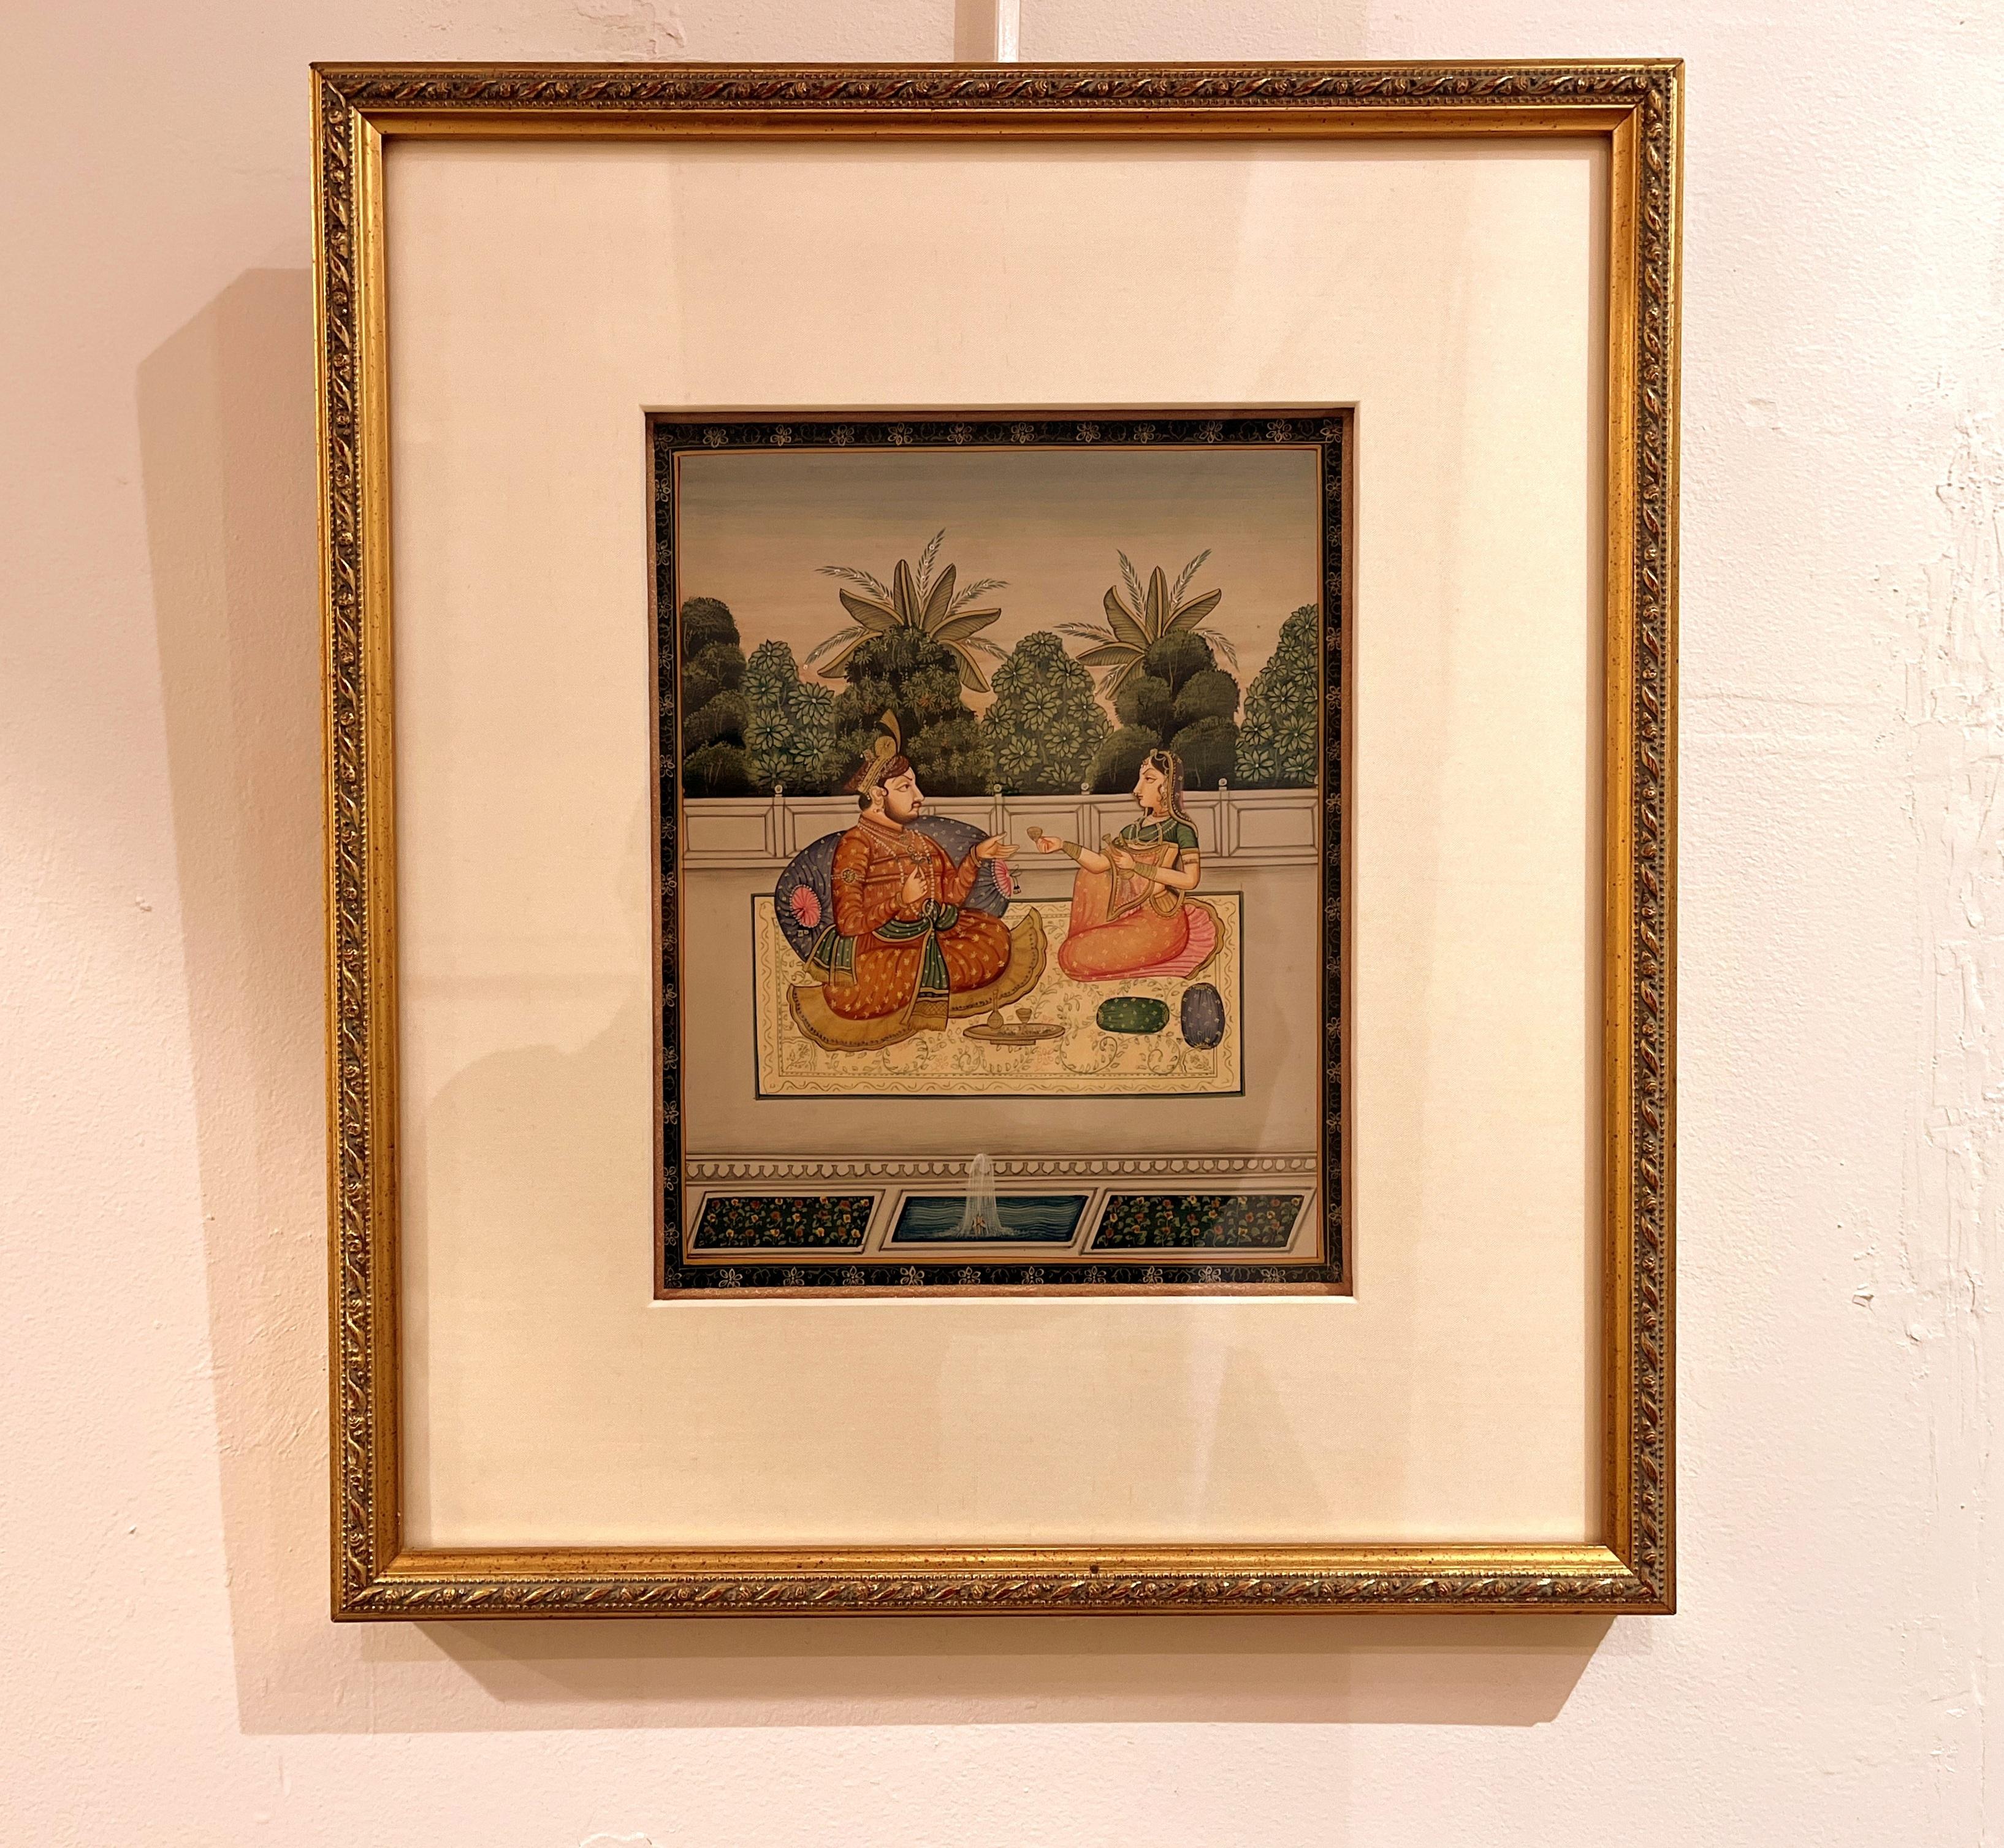 Framed refined Indian court painting, beautiful colors and gold leafing, exquisite details, 19th century, Conservation framed
Overall size with frame:  14.8